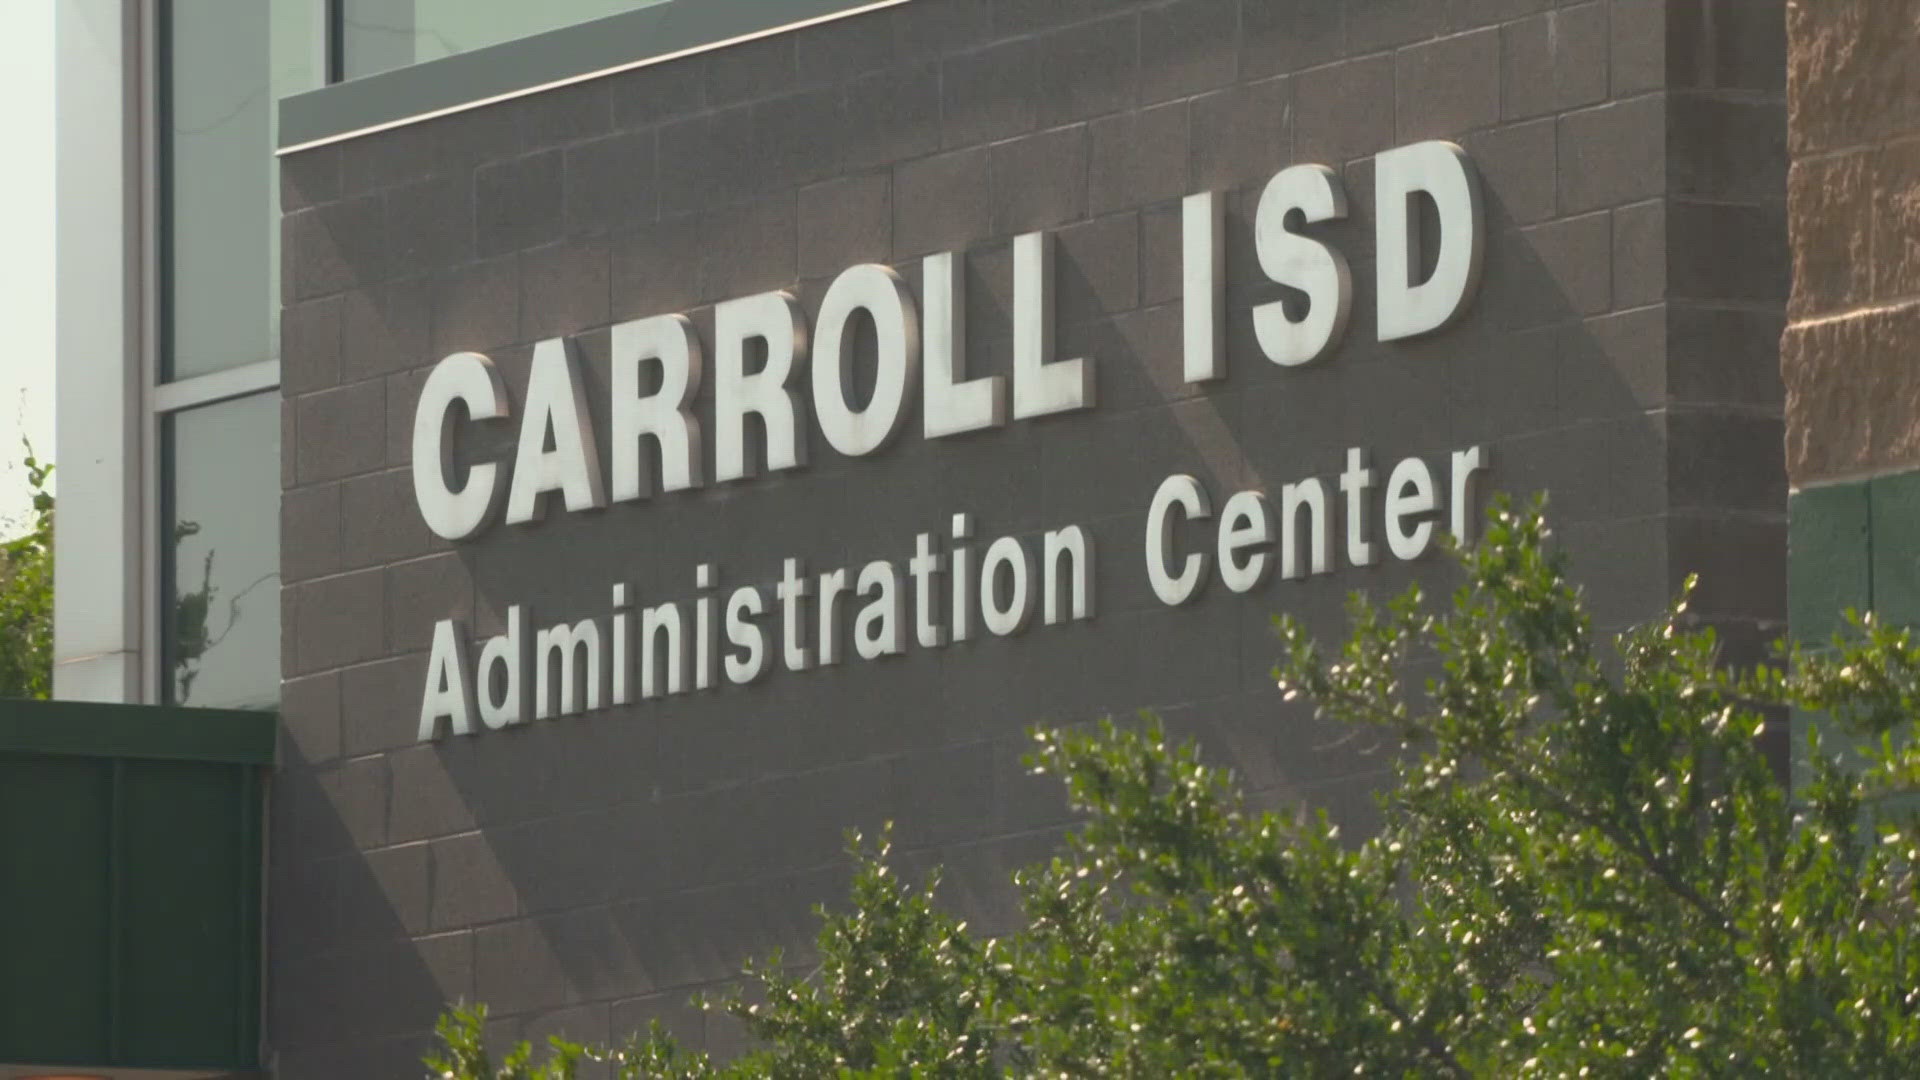 U.S. District Judge Reed O’Connor said his injunction covers Carroll ISD in Southlake for now but requested briefings by July 18 about potentially broadening it.